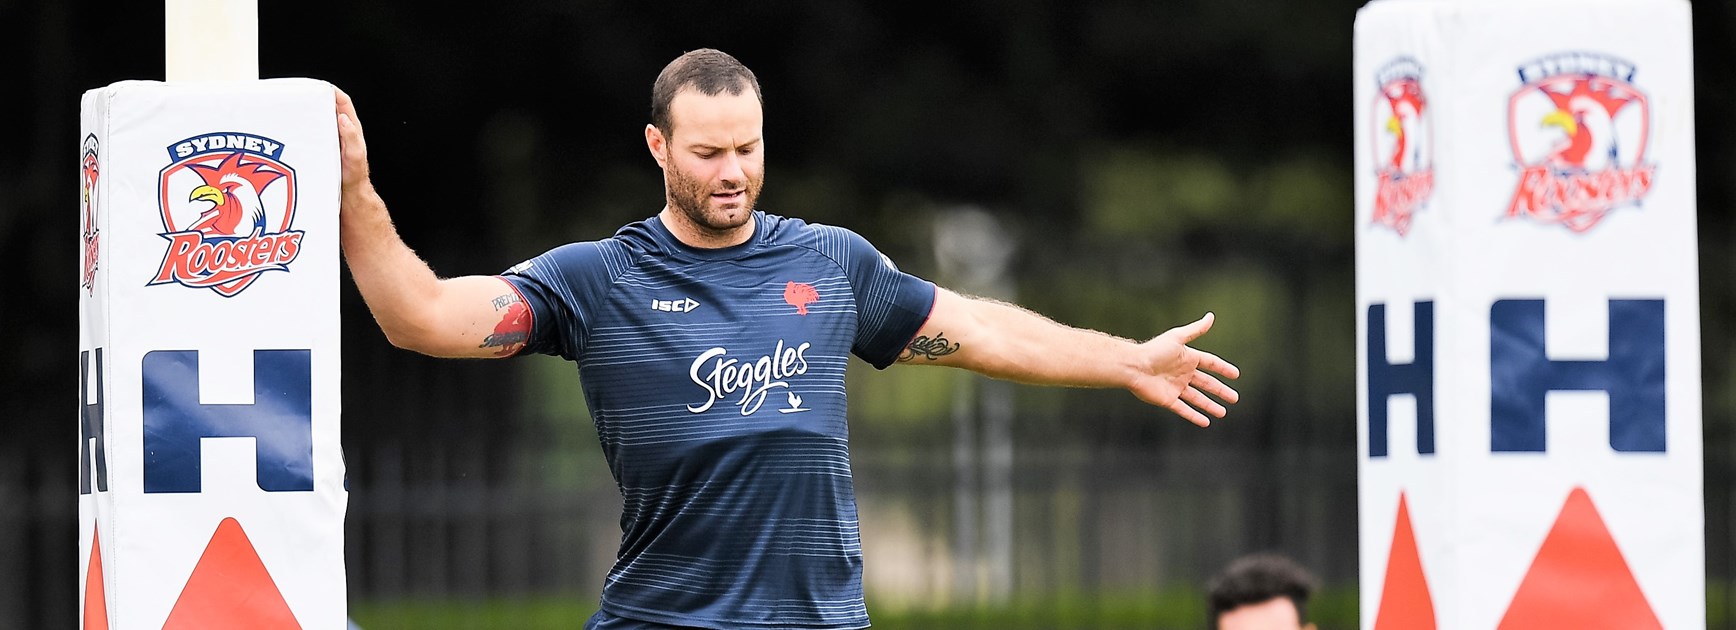 Sydney Roosters captain Boyd Cordner.